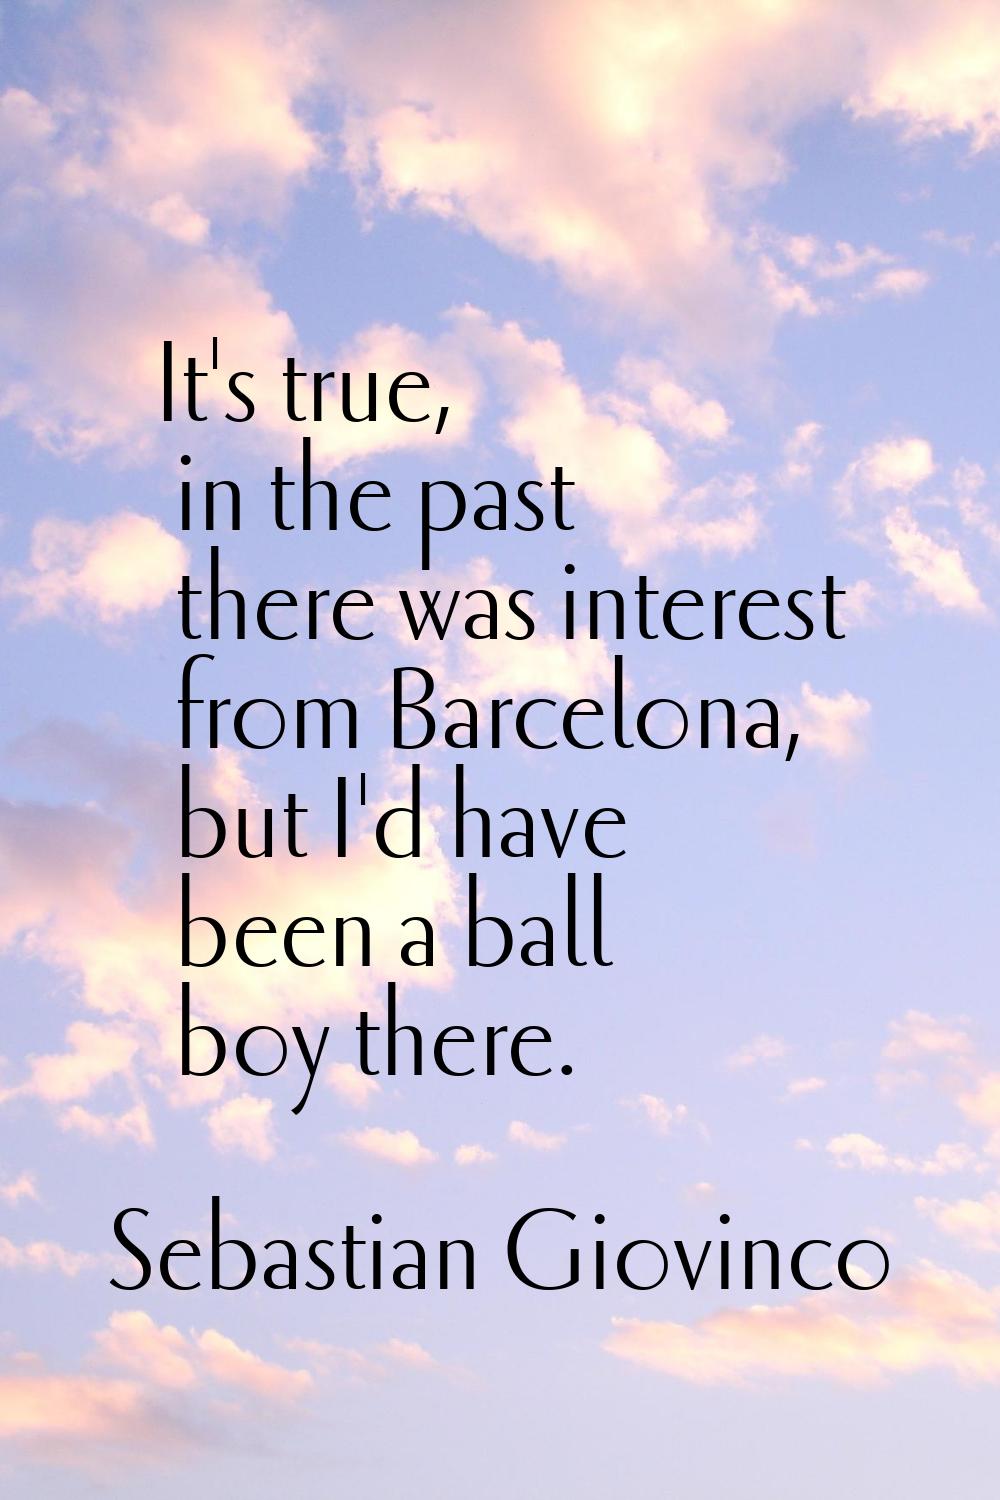 It's true, in the past there was interest from Barcelona, but I'd have been a ball boy there.